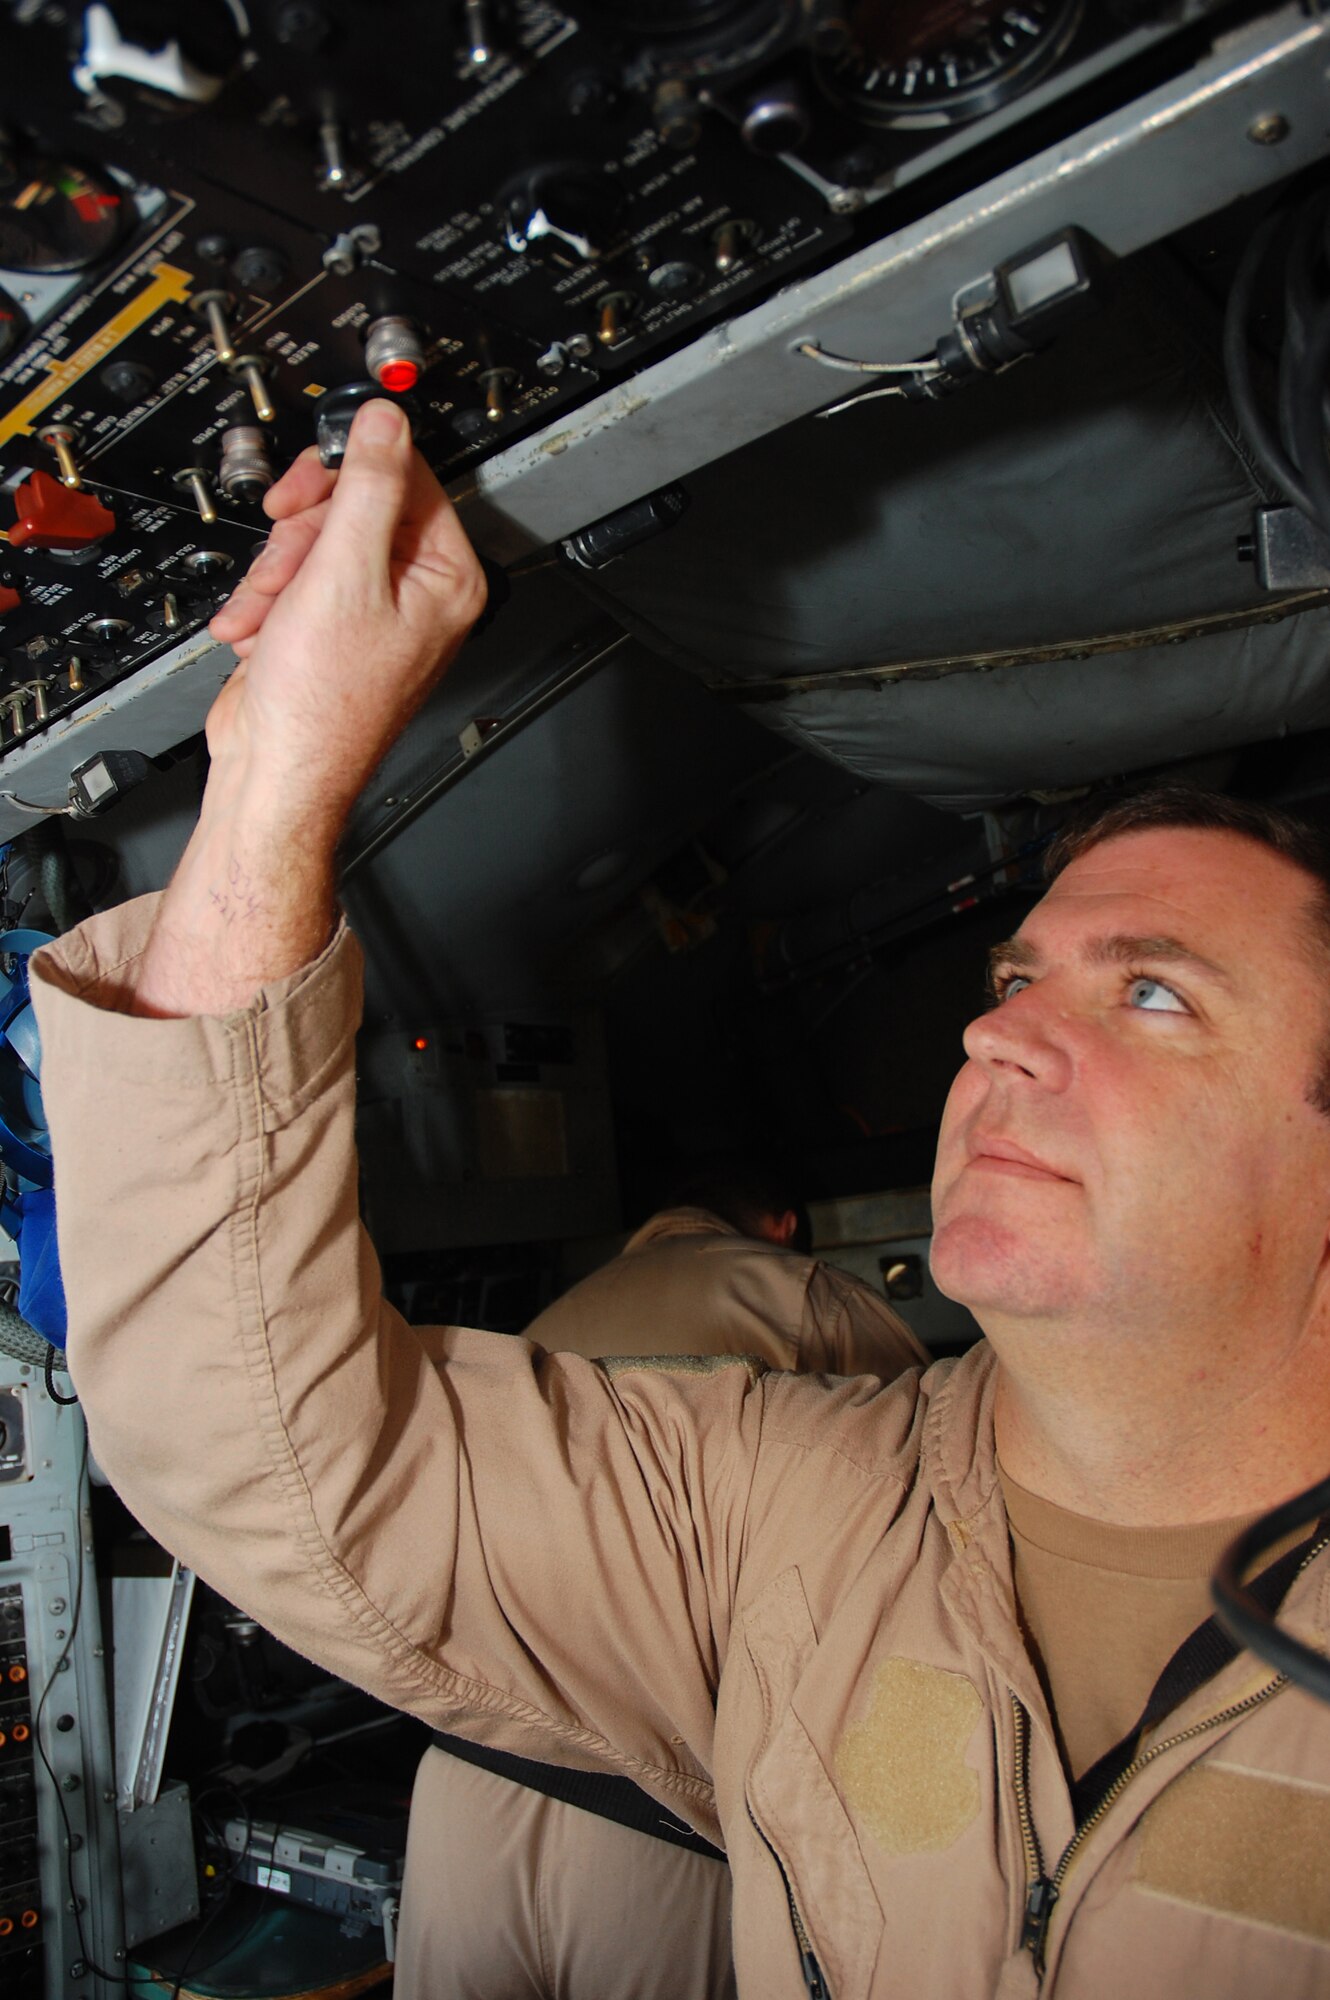 SOUTHWEST ASIA -- Master Sgt. Anthony Roy conducts a preflight inspection on an EC-130H Compass Call aircraft Dec. 8 here.  Sergeant Roy is an instructor flight engineer with the 43rd Expeditionary Electronic Combat Squadron and is deployed from Davis-Monthan AFB., Ariz.  (U.S. Air Force photo/Staff Sgt. Tia Schroeder)